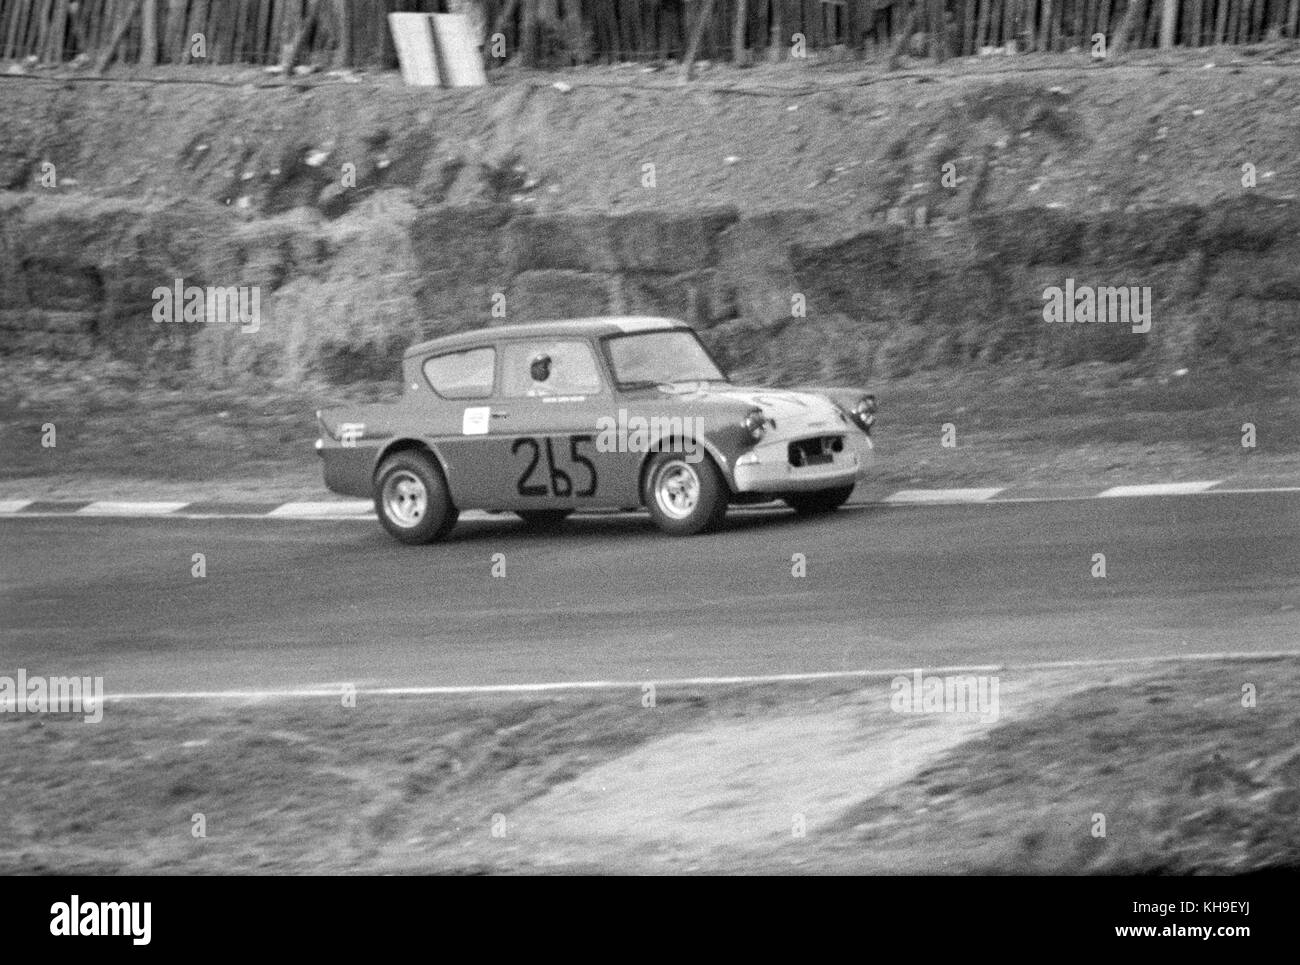 A Ford Anglia, race number 265, being driven in a race at the Brands Hatch circuit in England in 1968. Stock Photo